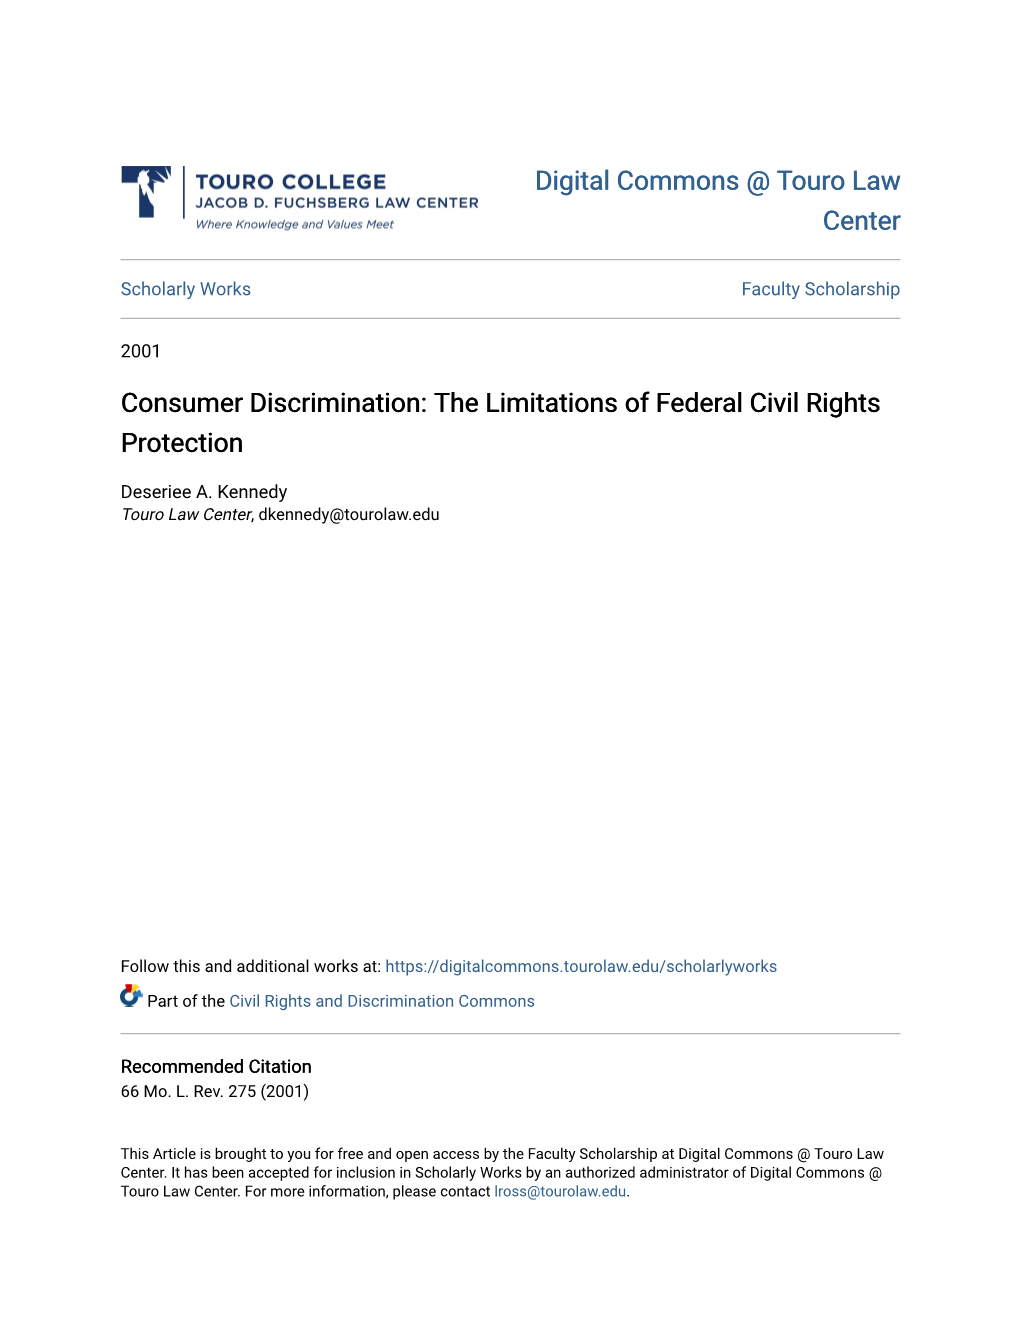 Consumer Discrimination: the Limitations of Federal Civil Rights Protection